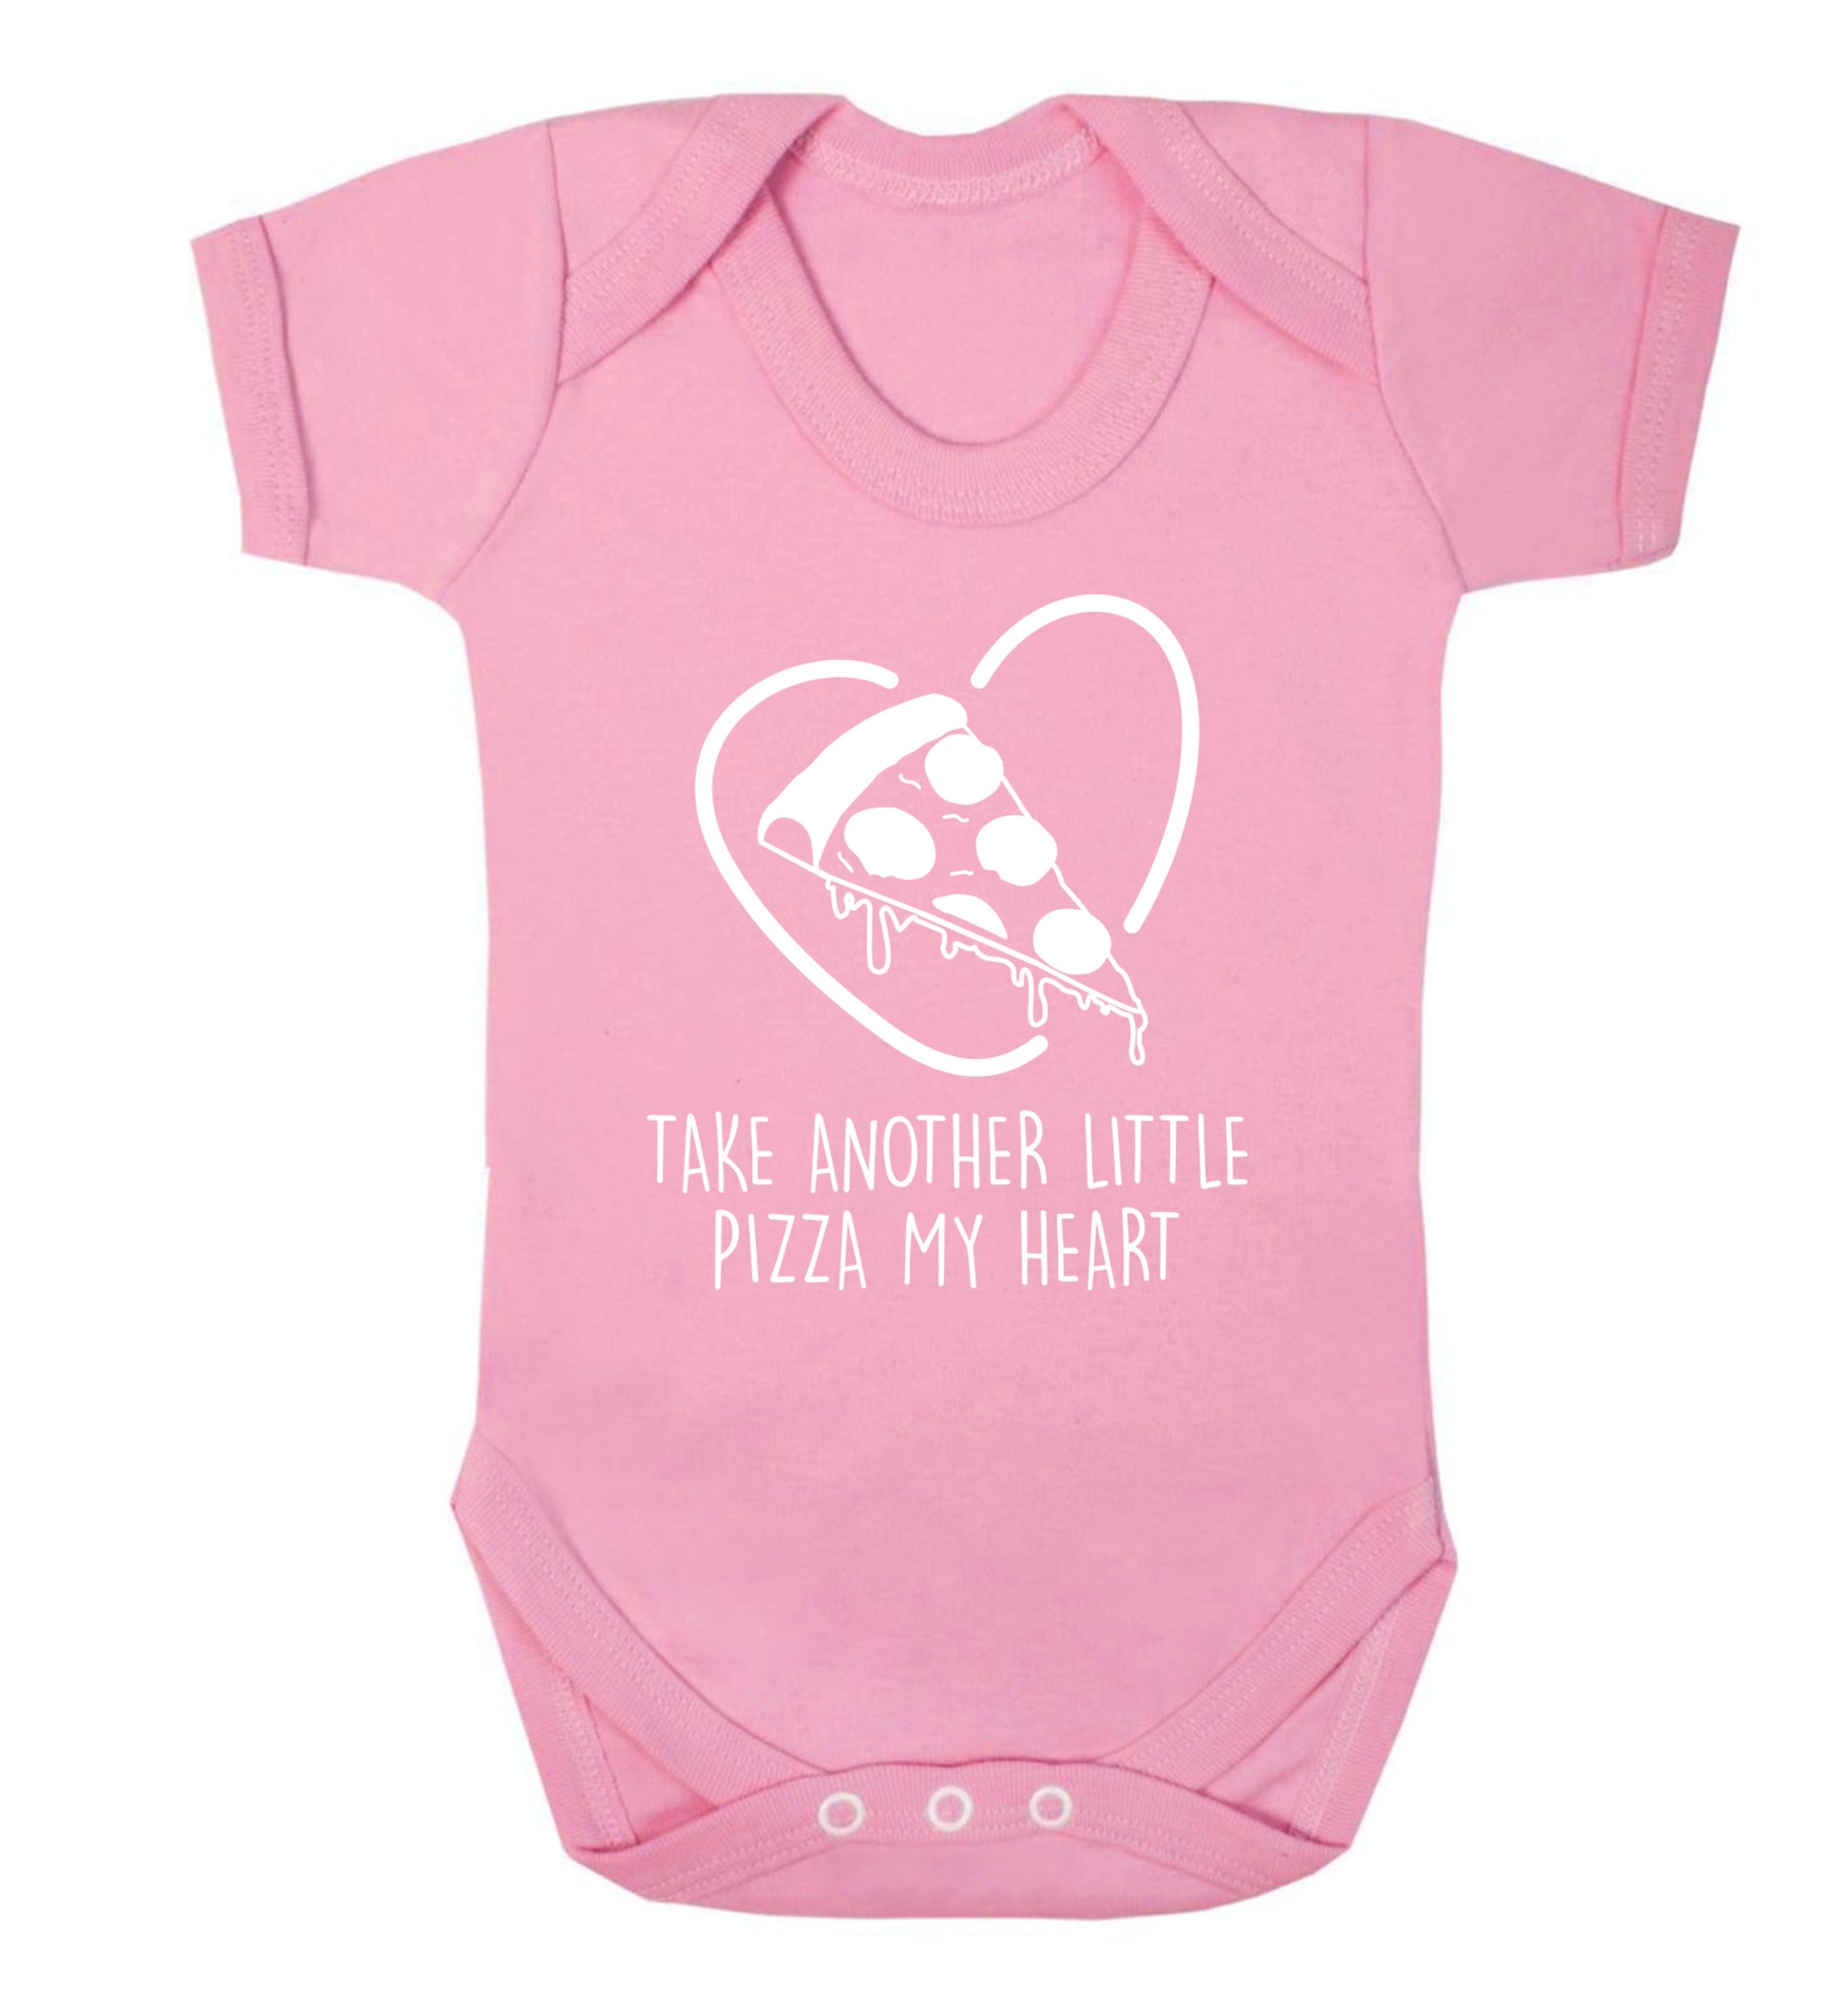 Take another little pizza my heart Baby Vest pale pink 18-24 months